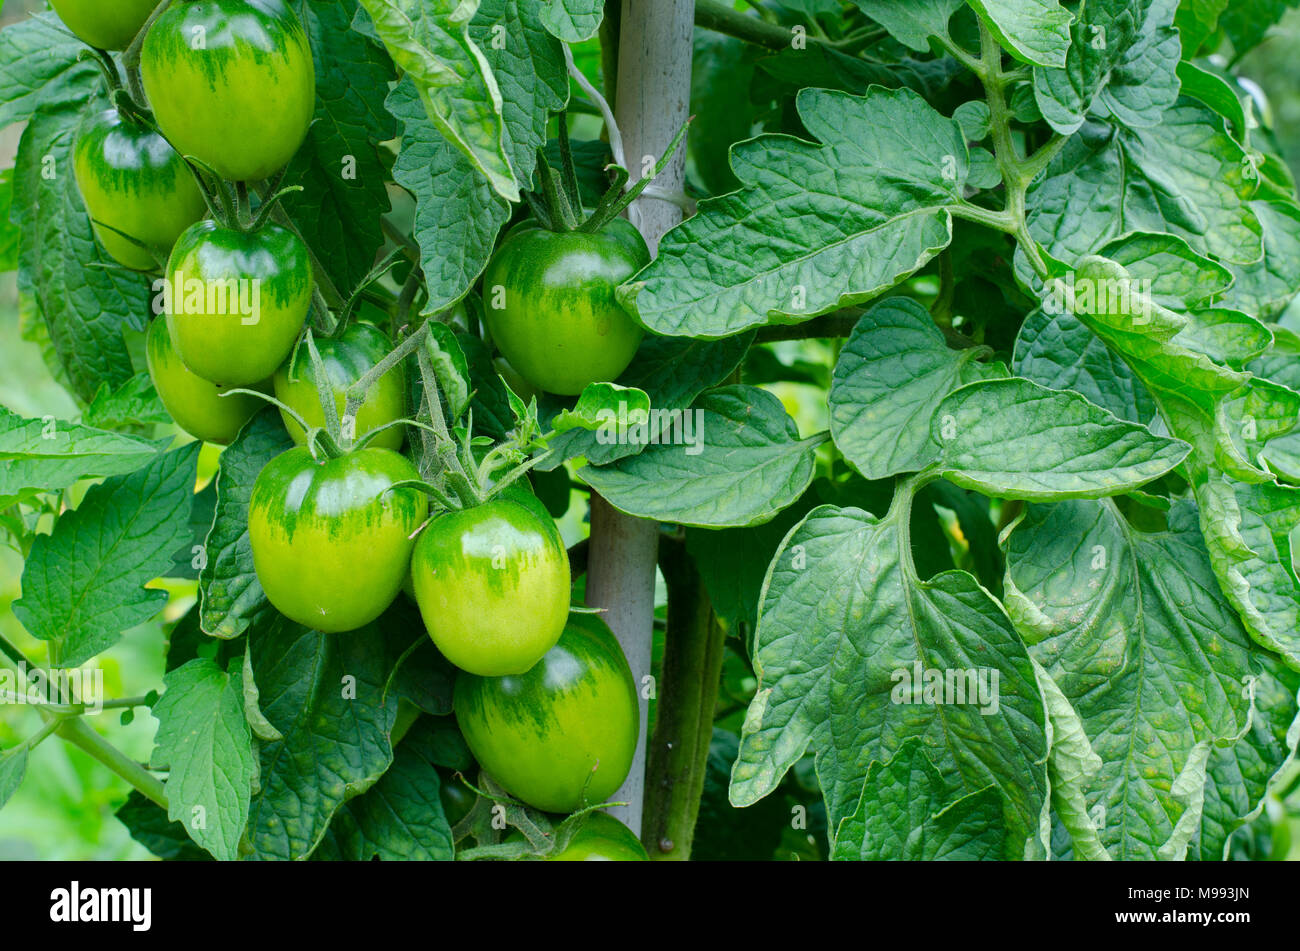 cluster of green plum tomato fruits with leaves on a vine Stock Photo